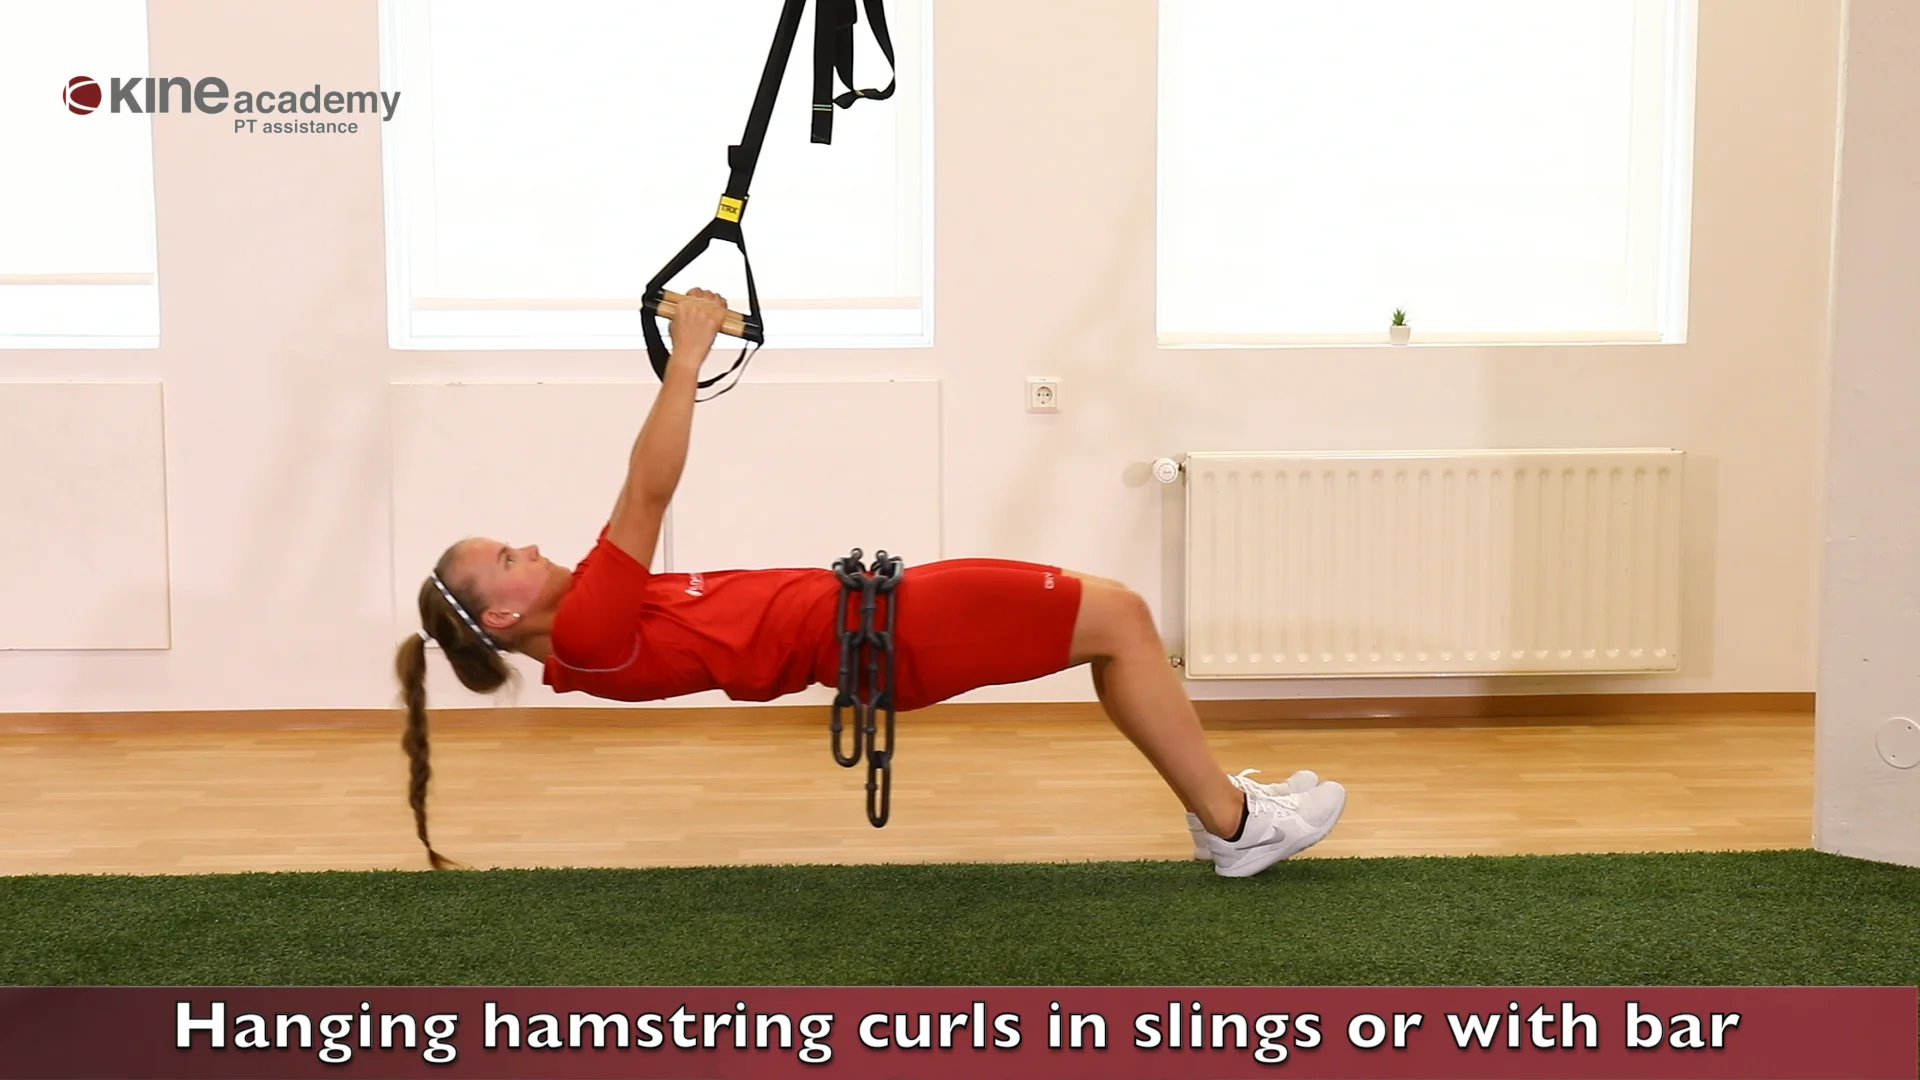 Hanging hamstring curls in slings or with bar on Vimeo